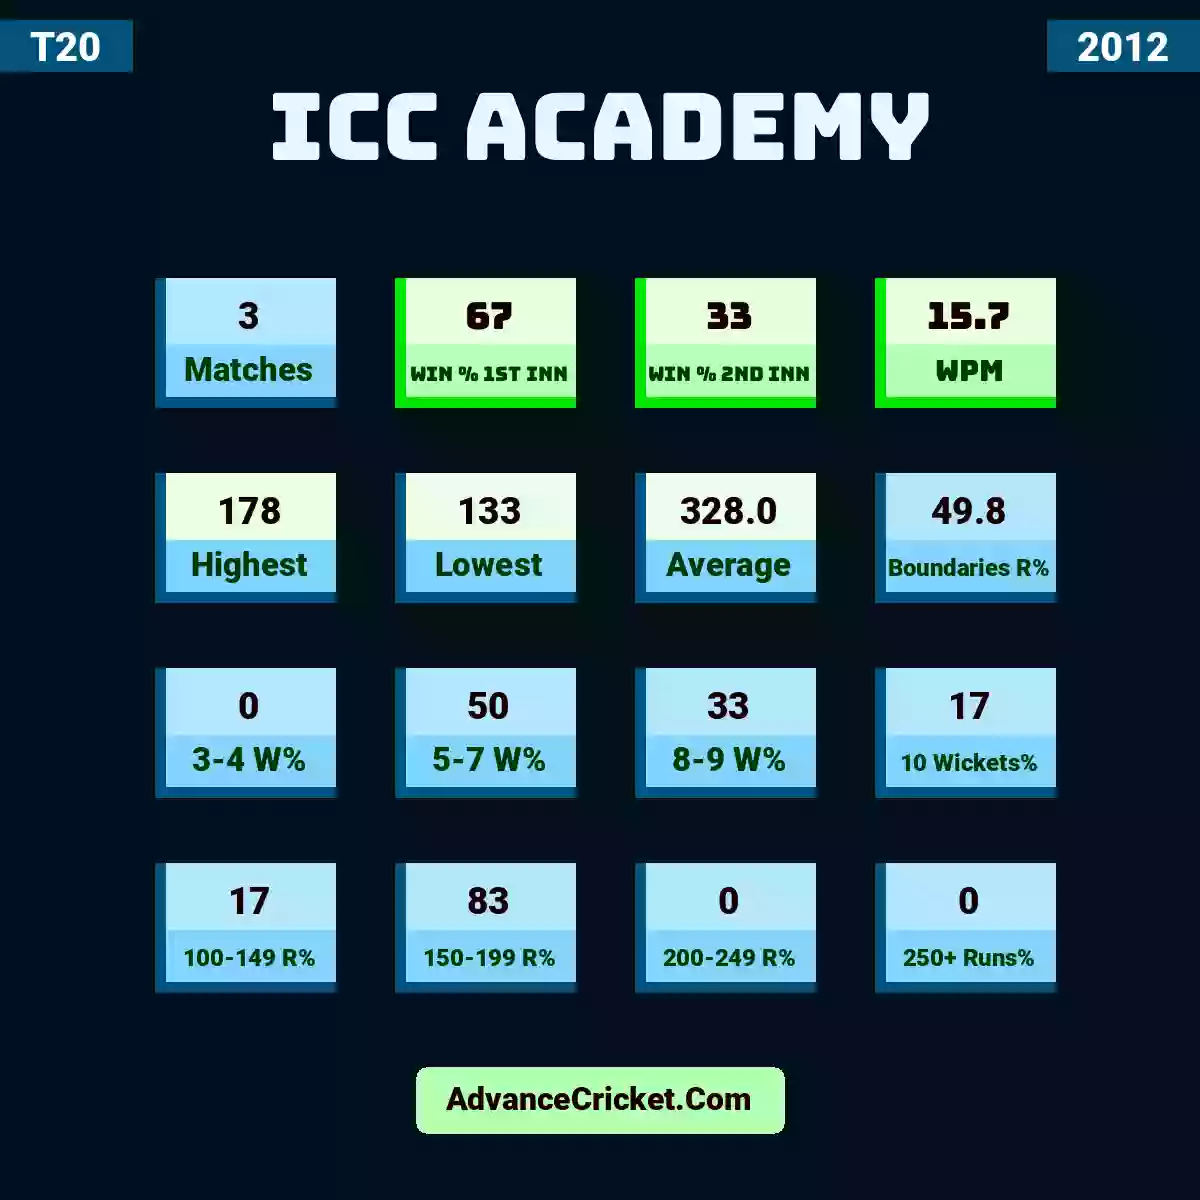 Image showing ICC Academy with Matches: 3, Win % 1st Inn: 67, Win % 2nd Inn: 33, WPM: 15.7, Highest: 178, Lowest: 133, Average: 328.0, Boundaries R%: 49.8, 3-4 W%: 0, 5-7 W%: 50, 8-9 W%: 33, 10 Wickets%: 17, 100-149 R%: 17, 150-199 R%: 83, 200-249 R%: 0, 250+ Runs%: 0.